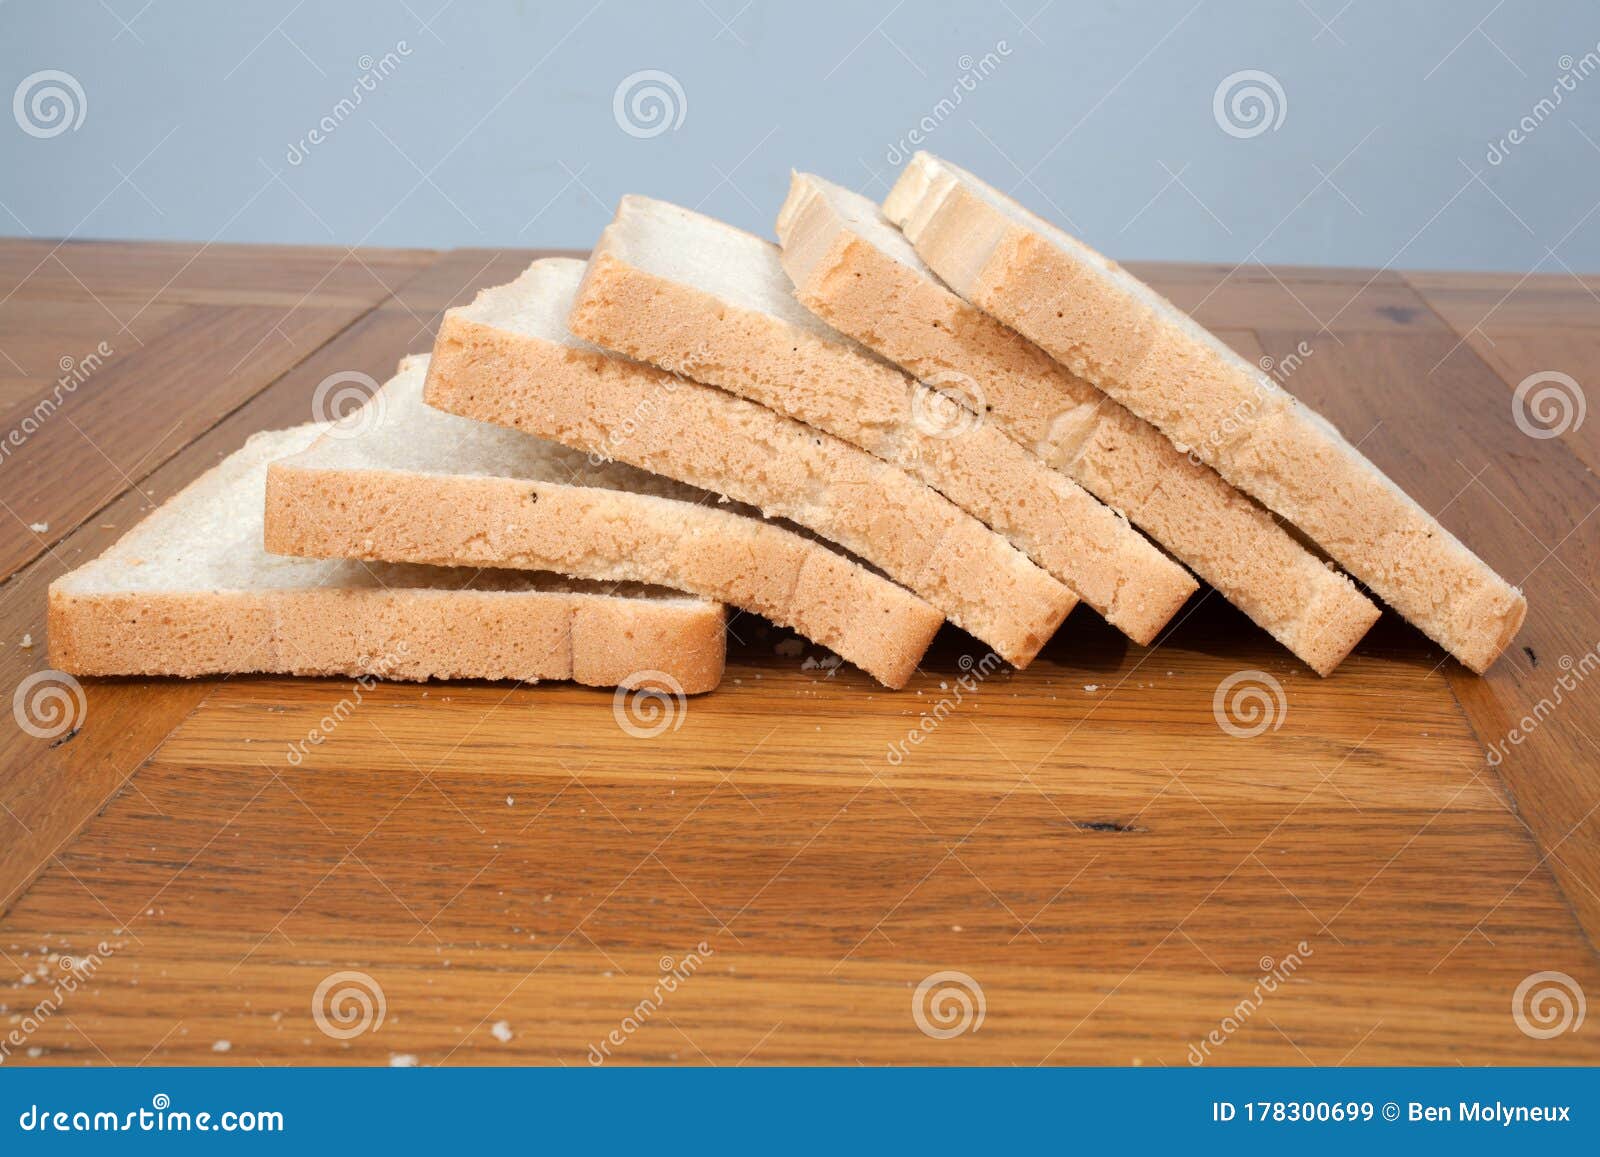 slices of white bread on a kitchen table